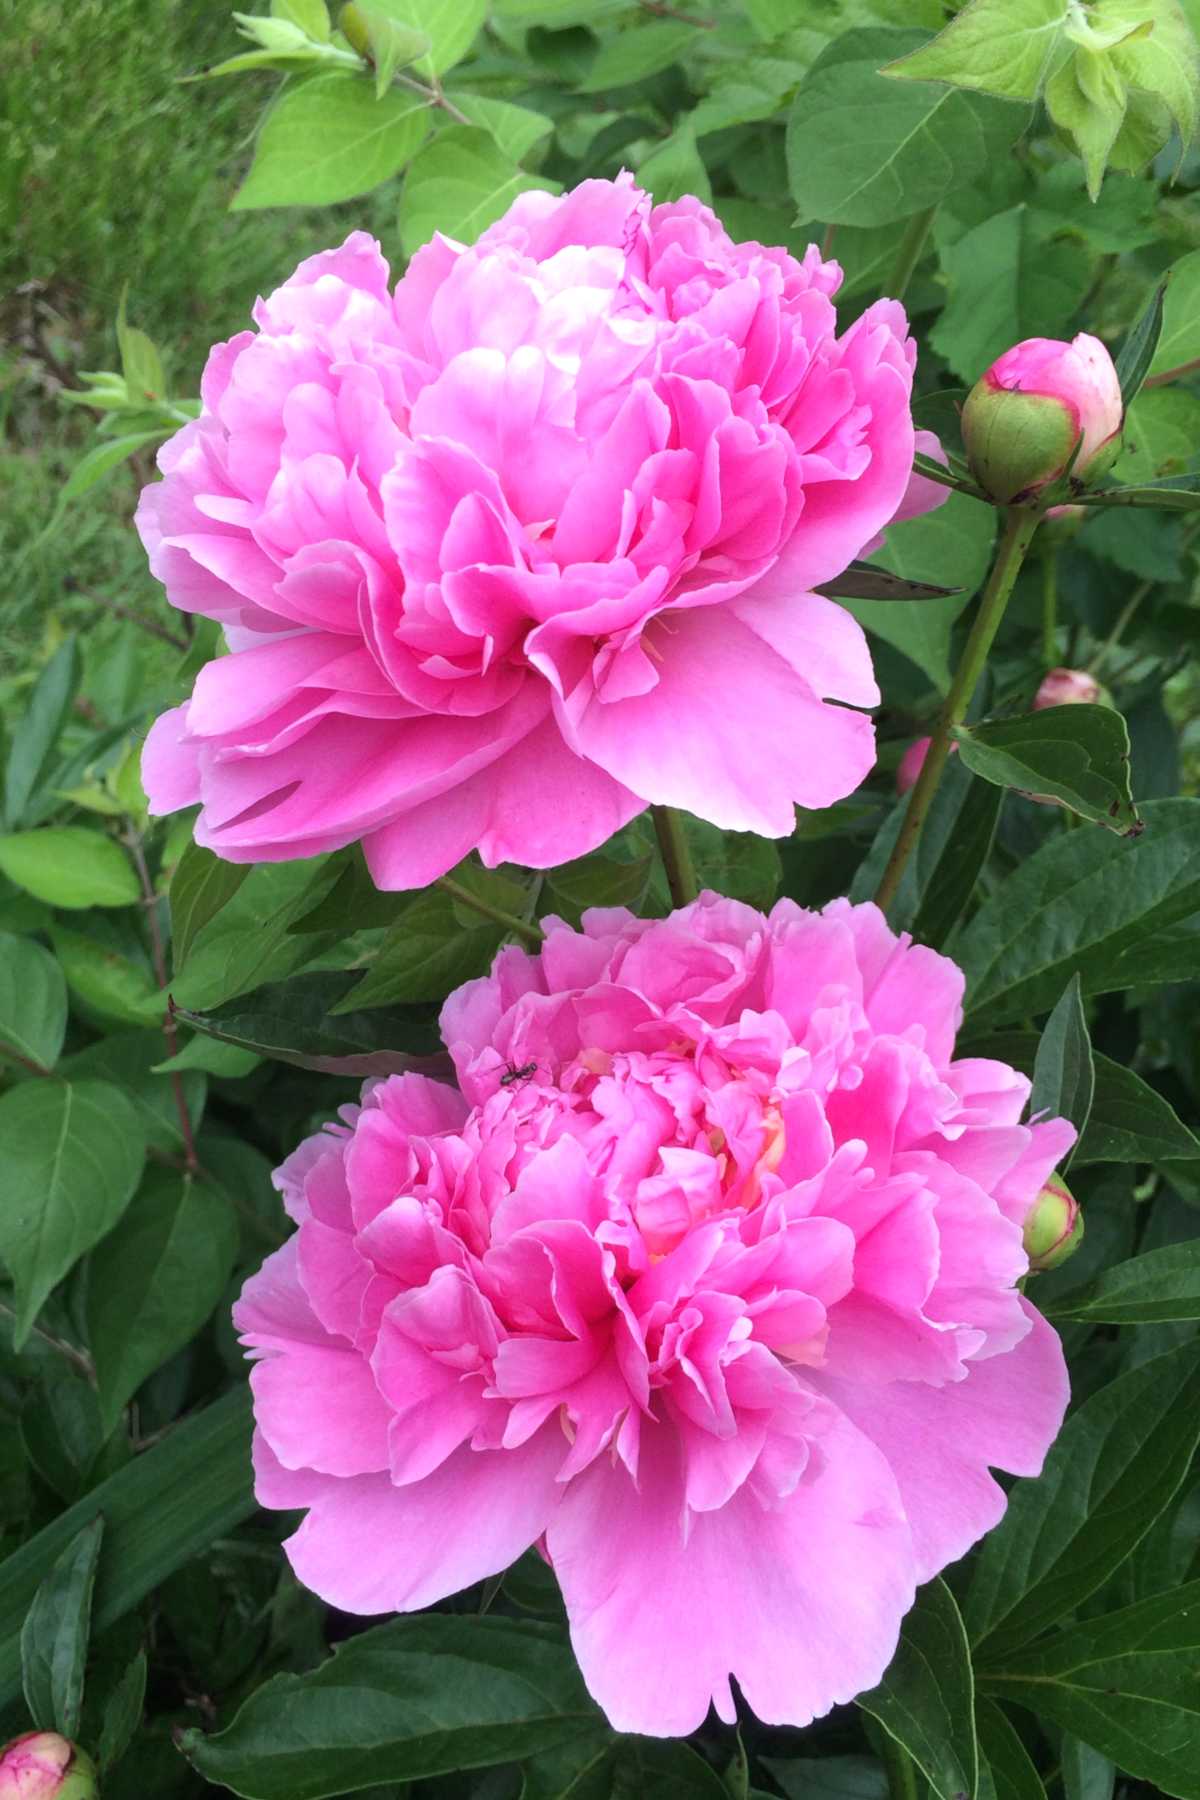 Two pink peony flowers in a garden